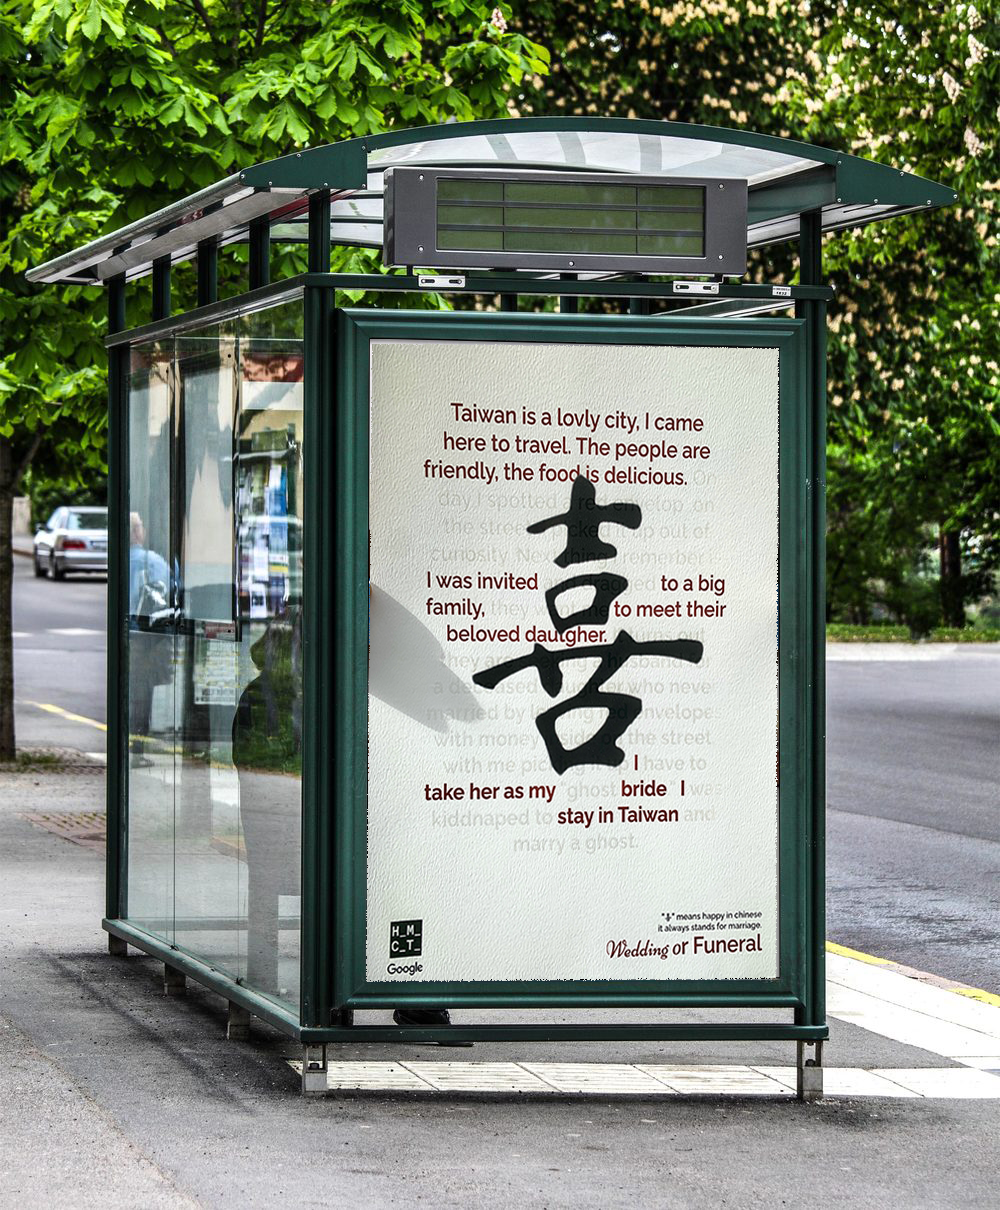 Mockup of a bus stop with a poster on Chinese Ghost Marriage by Olivia Jia, BA Graphic Communication. The Chinese symbol for happiness is coloured black in the centre. Red text detailing a wedding arrangement surrounds it. In off-white font, an alternate side of the story is shown.